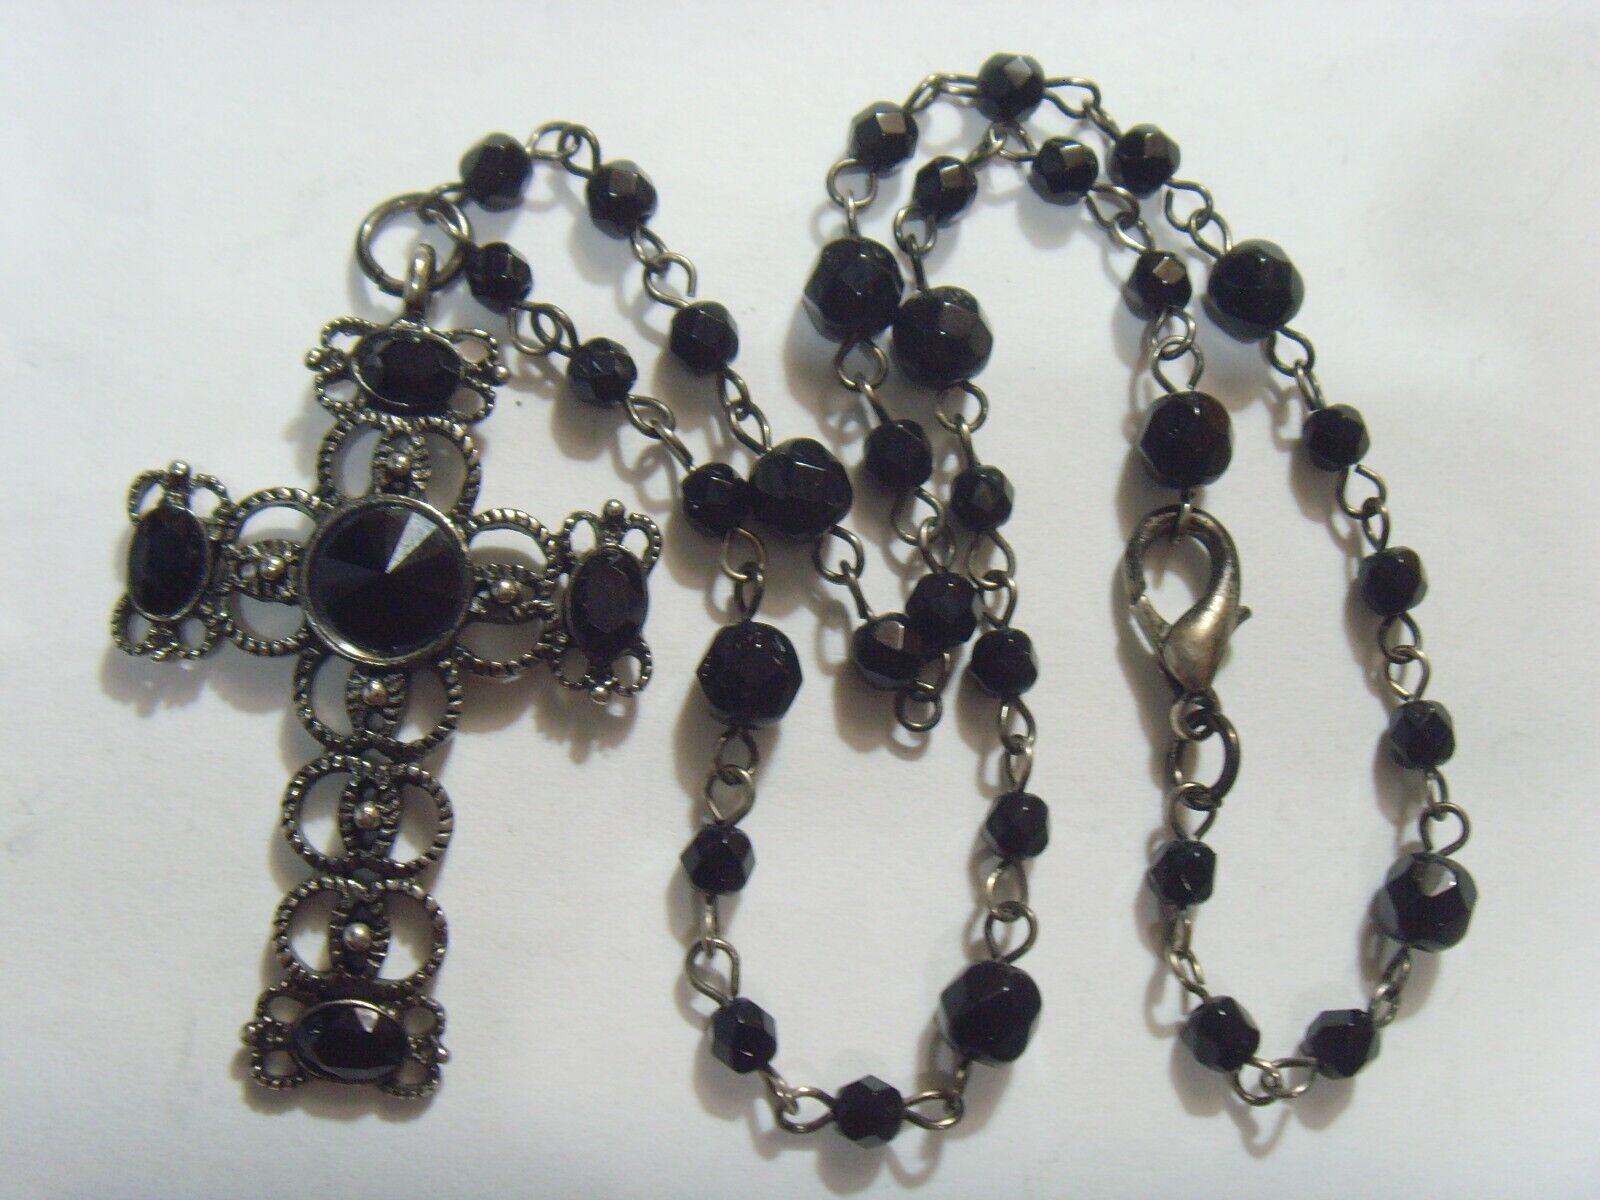 vintg Black bejeweled Christian cross cut crystal beads religious necklace 52872